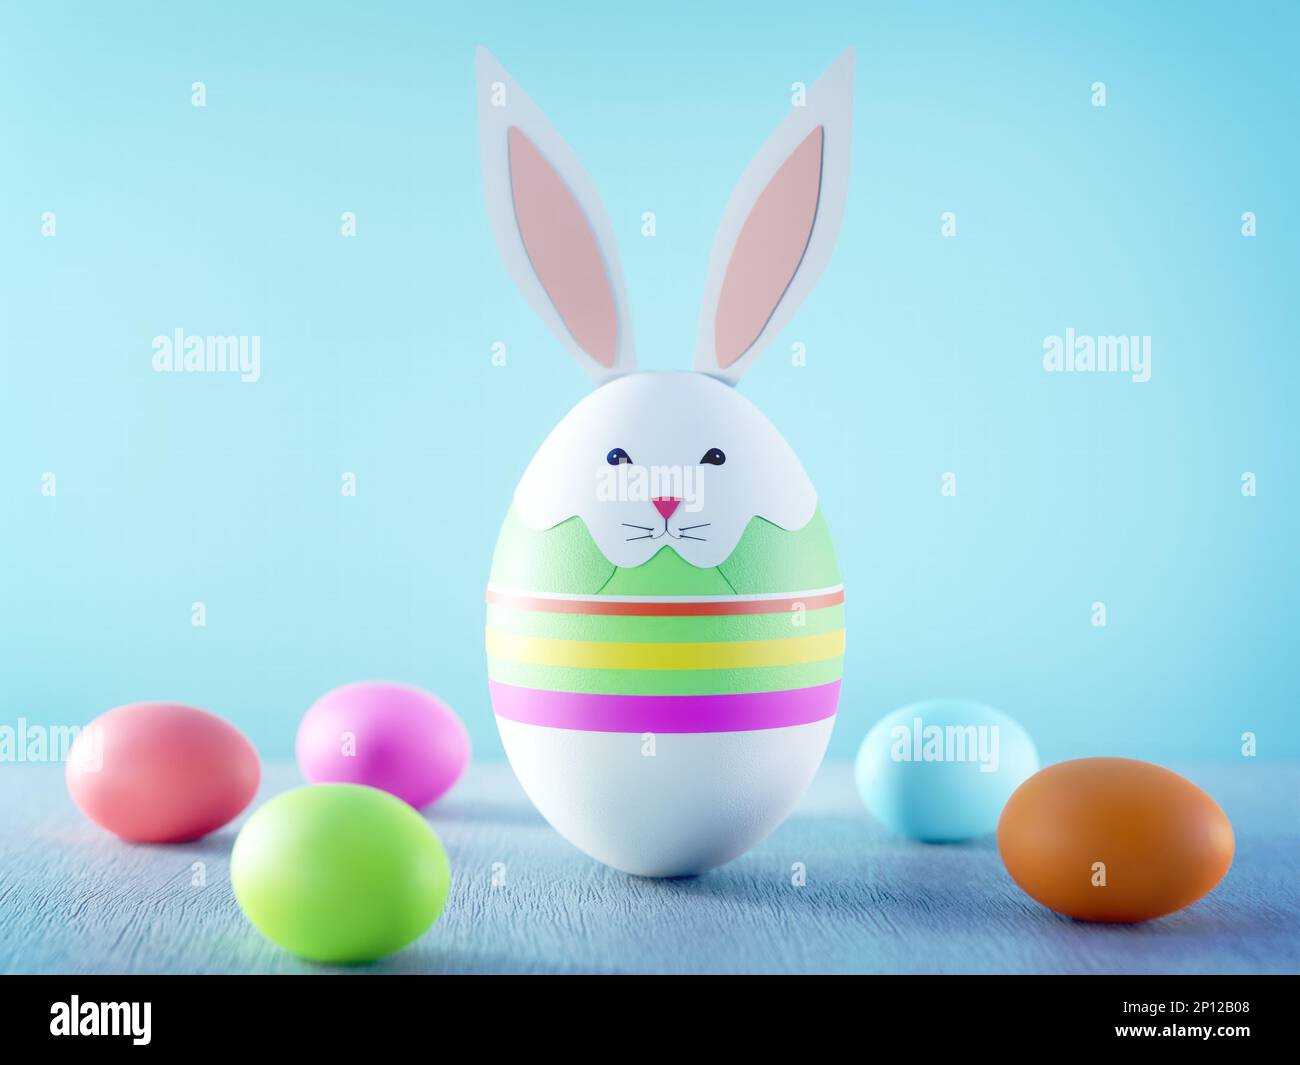 3D rendering of Easter bunny made out of egg with paper cutting decors over blue background Stock Photo